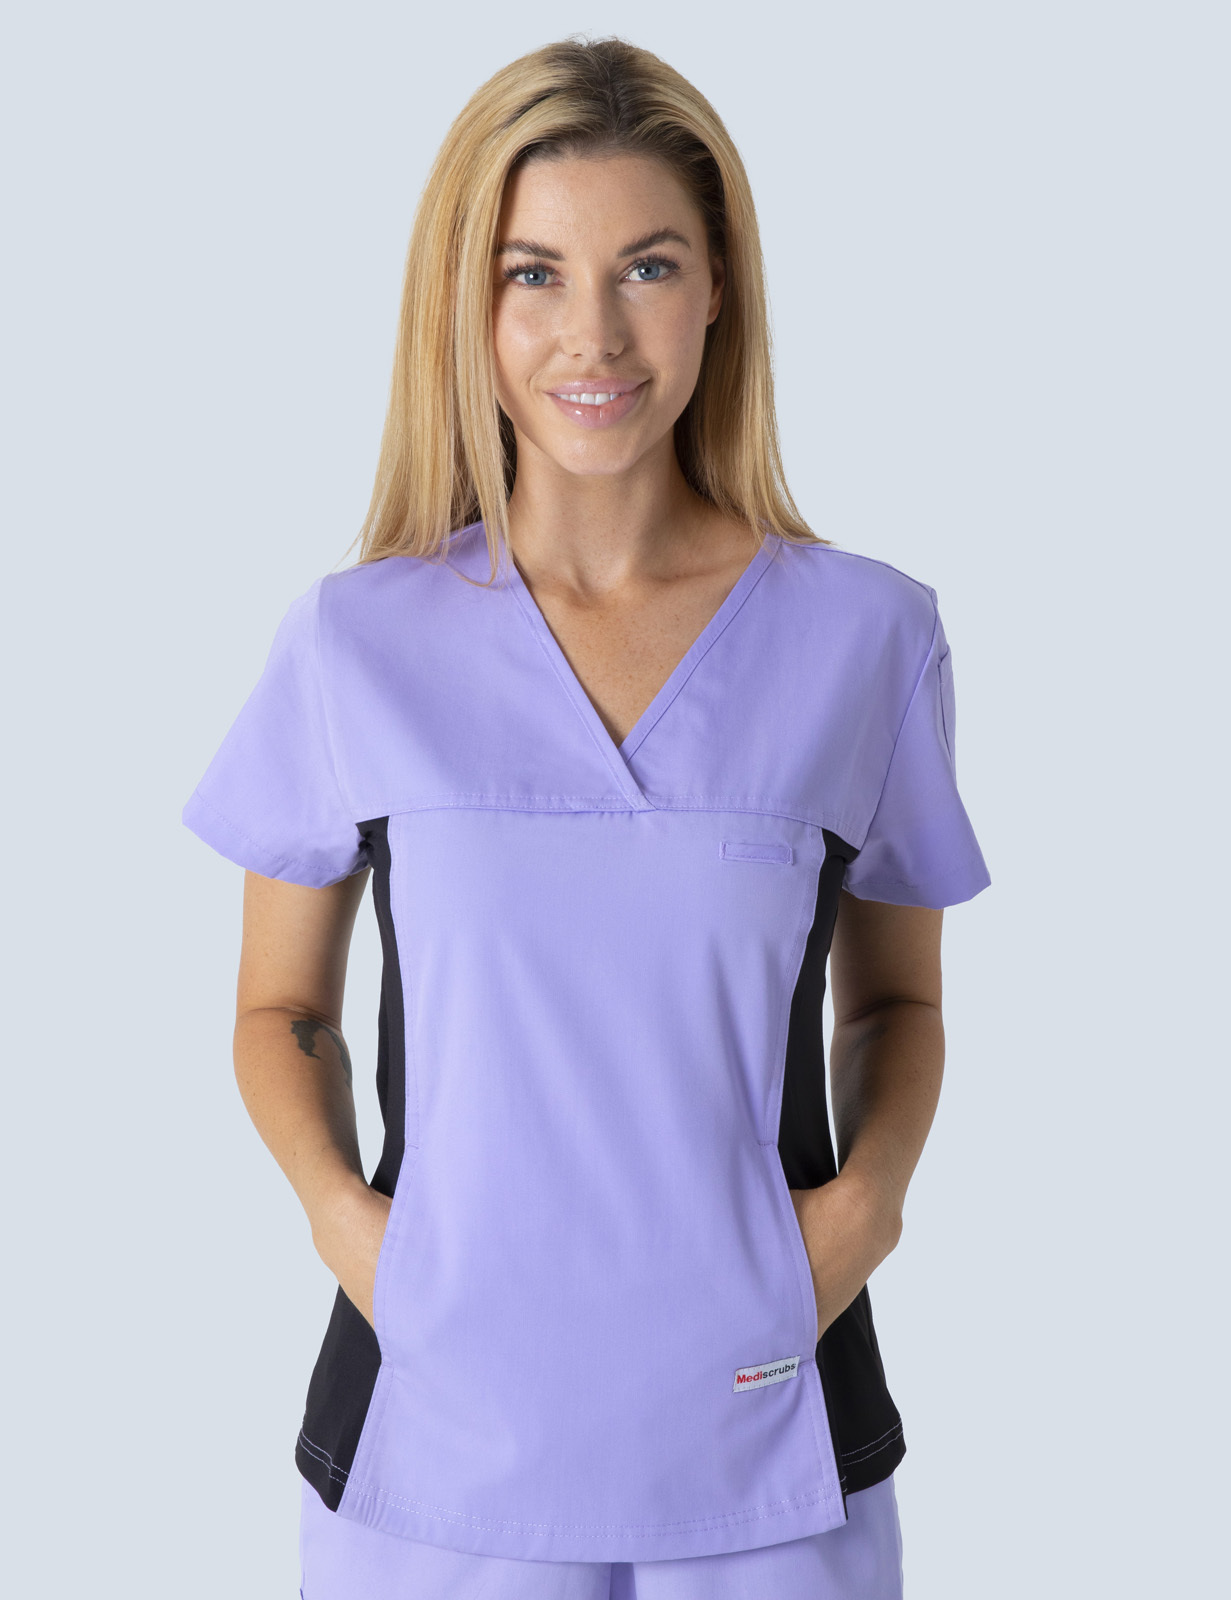 Women's Fit Solid Scrub Top With Spandex Panel - Lilac - Large